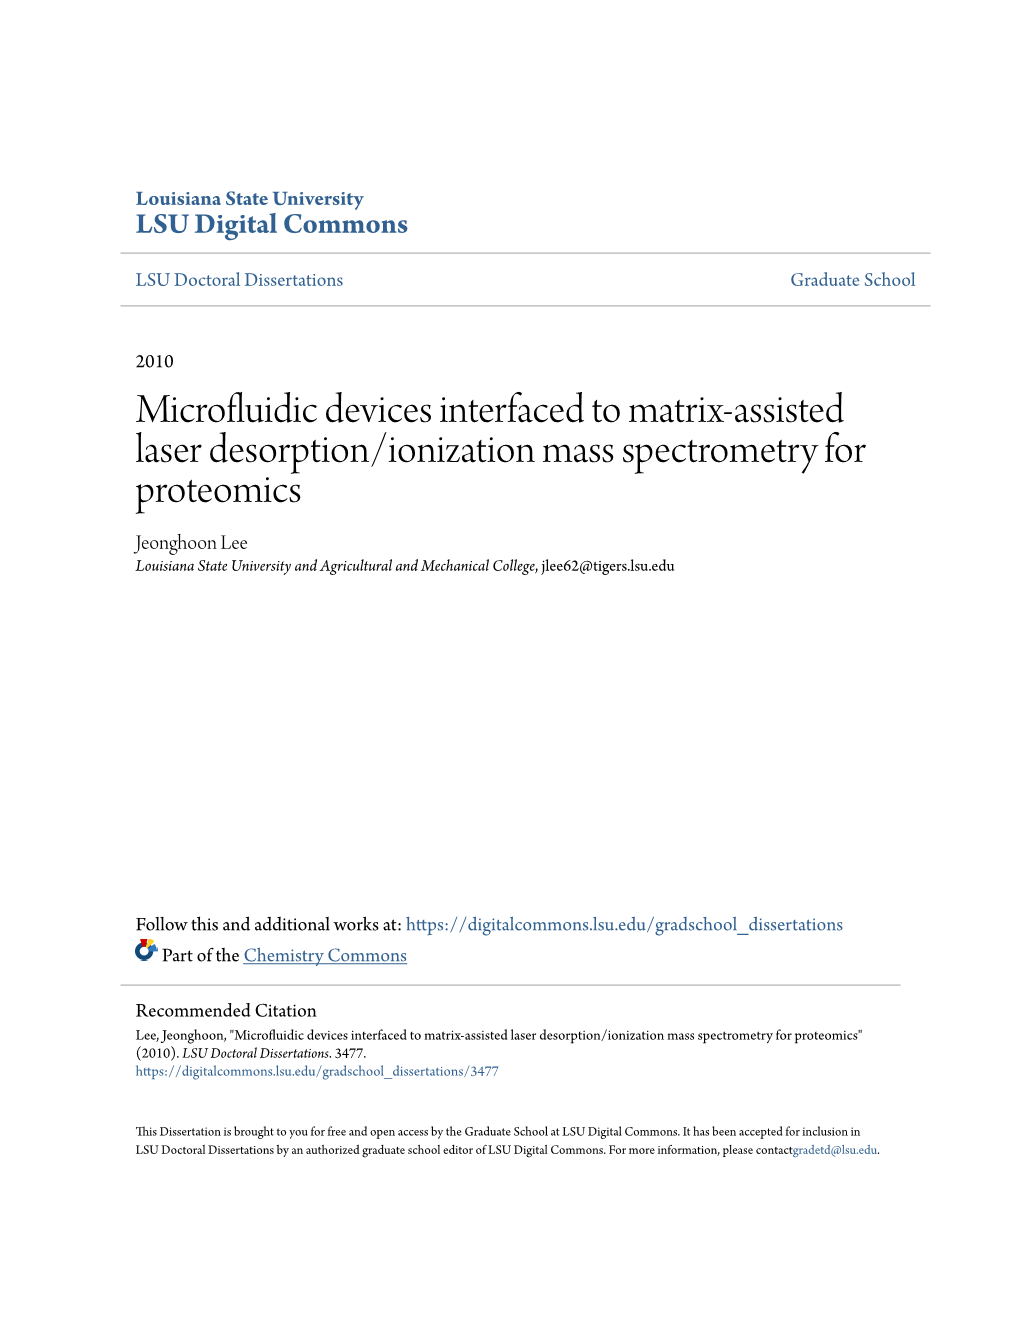 Microfluidic Devices Interfaced to Matrix-Assisted Laser Desorption